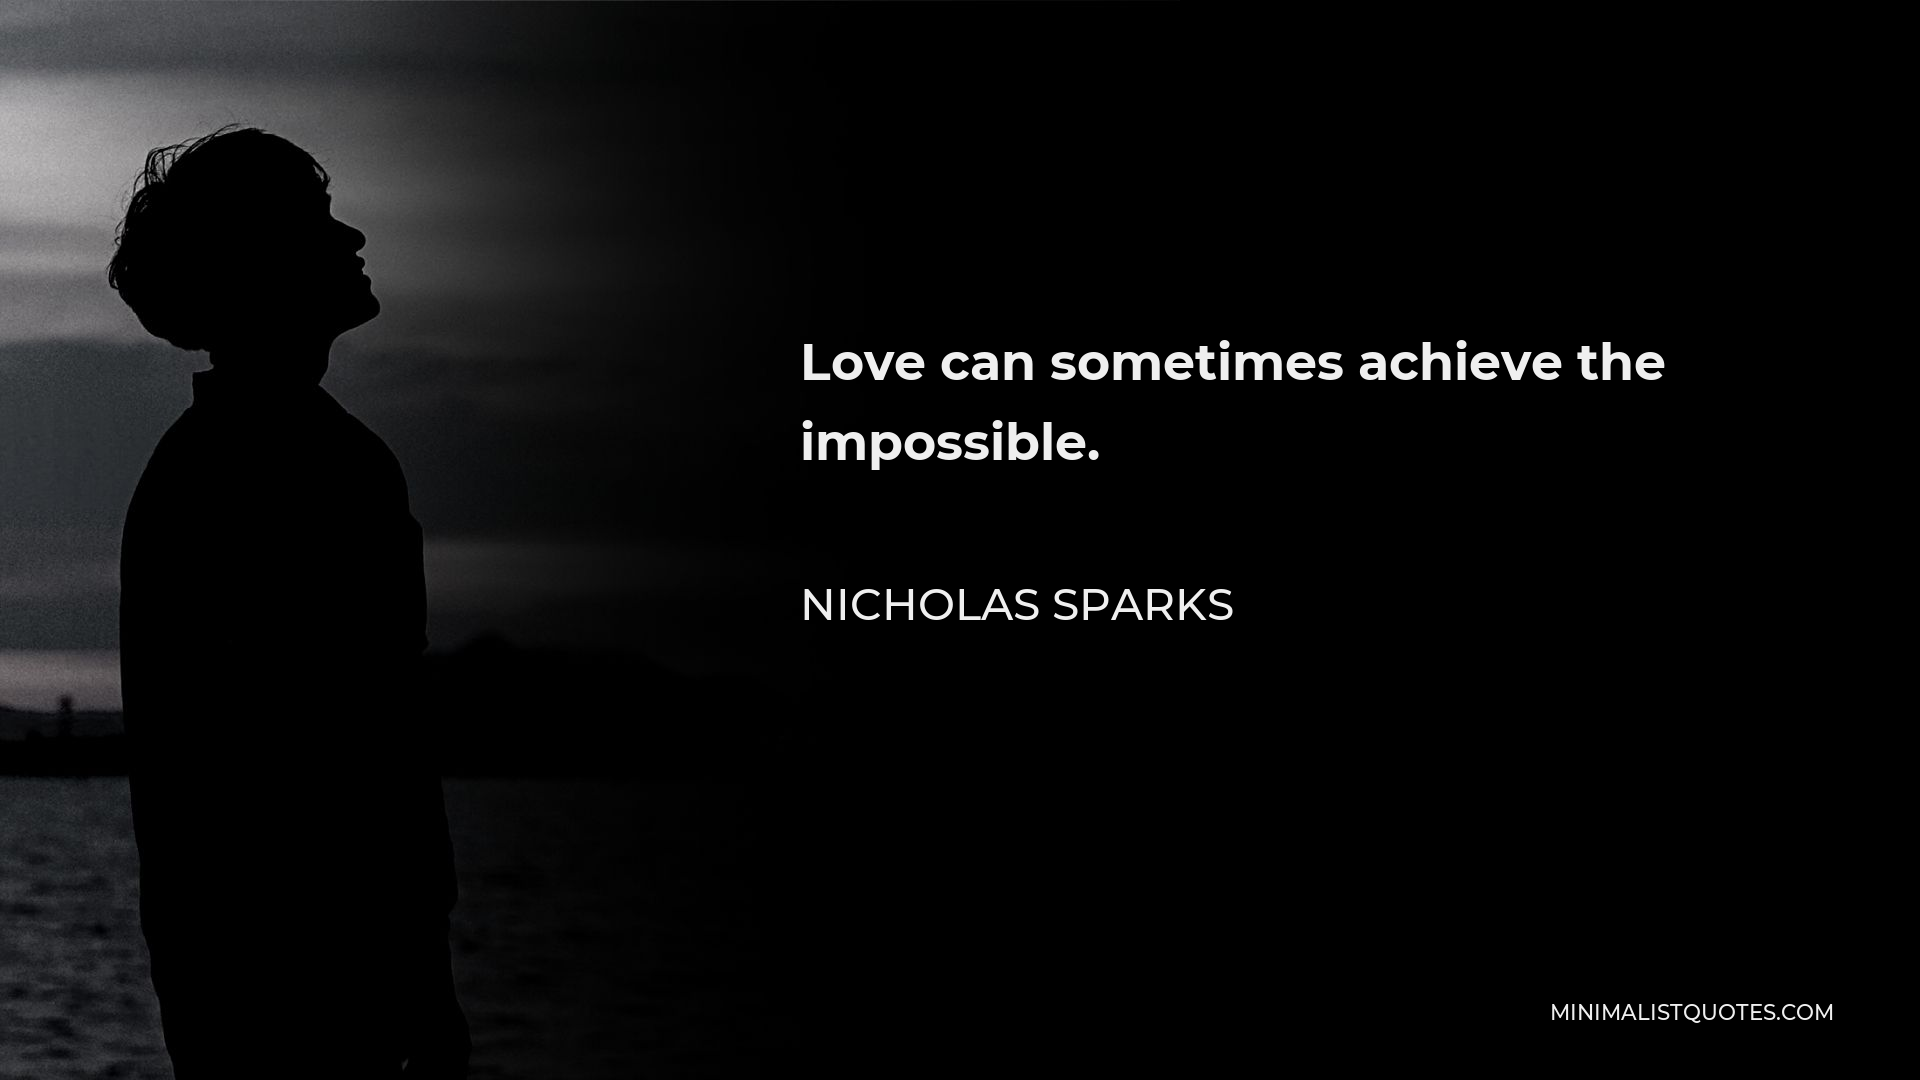 Nicholas Sparks Quote - Love can sometimes achieve the impossible.